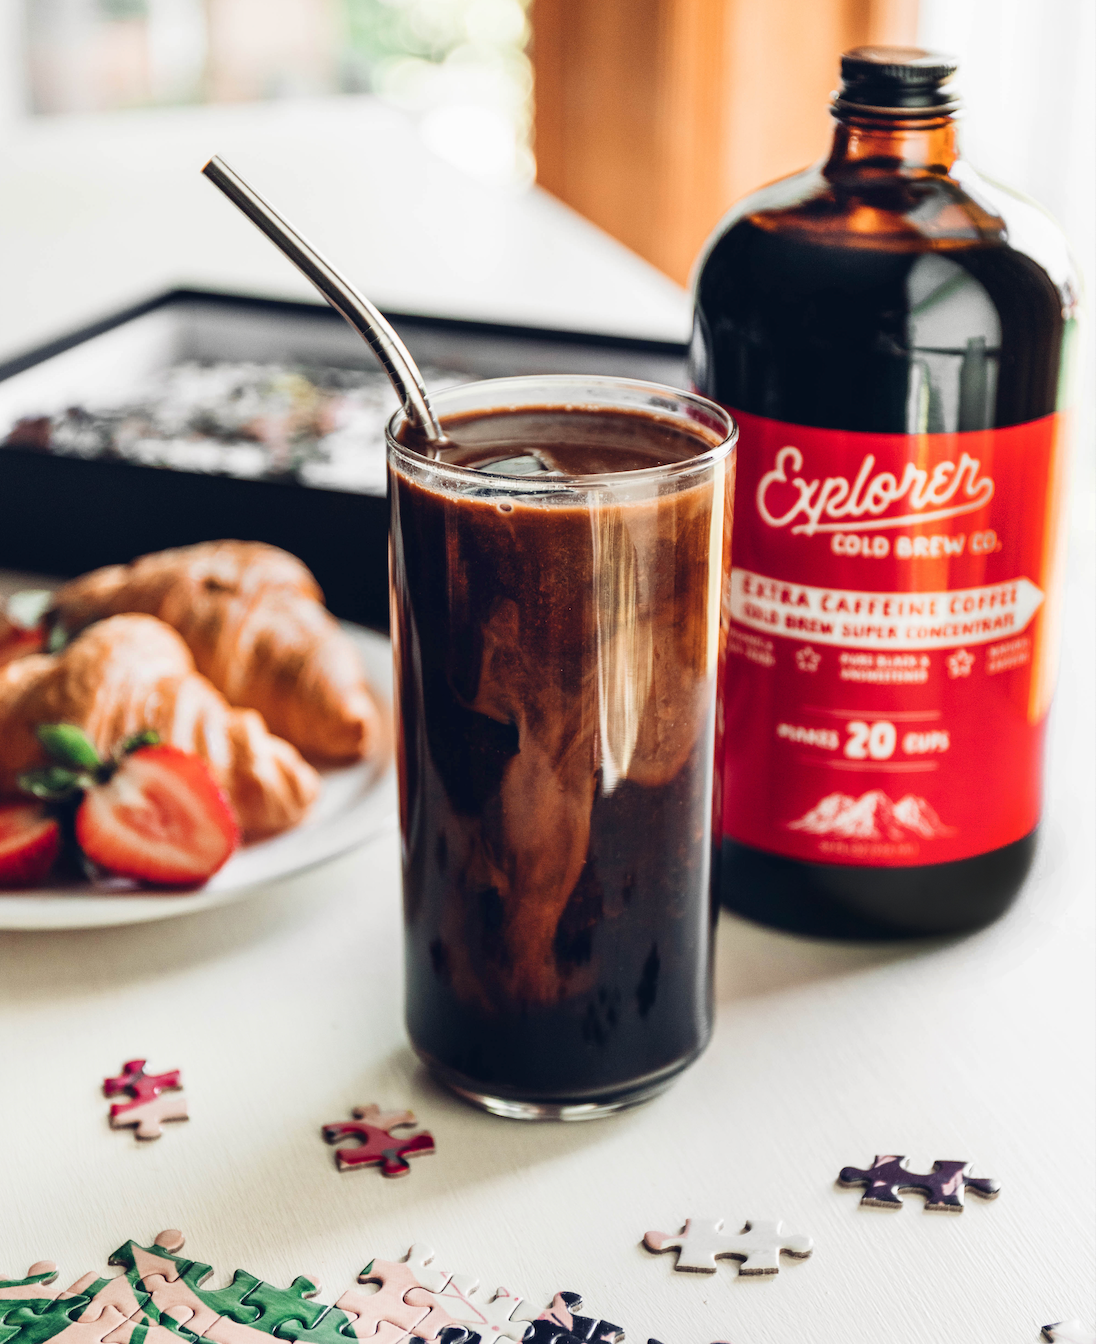 What Makes a Good Cold Brew? 4 Tips of the Cold Brew Trade if You’re Making Cold Brew at Home